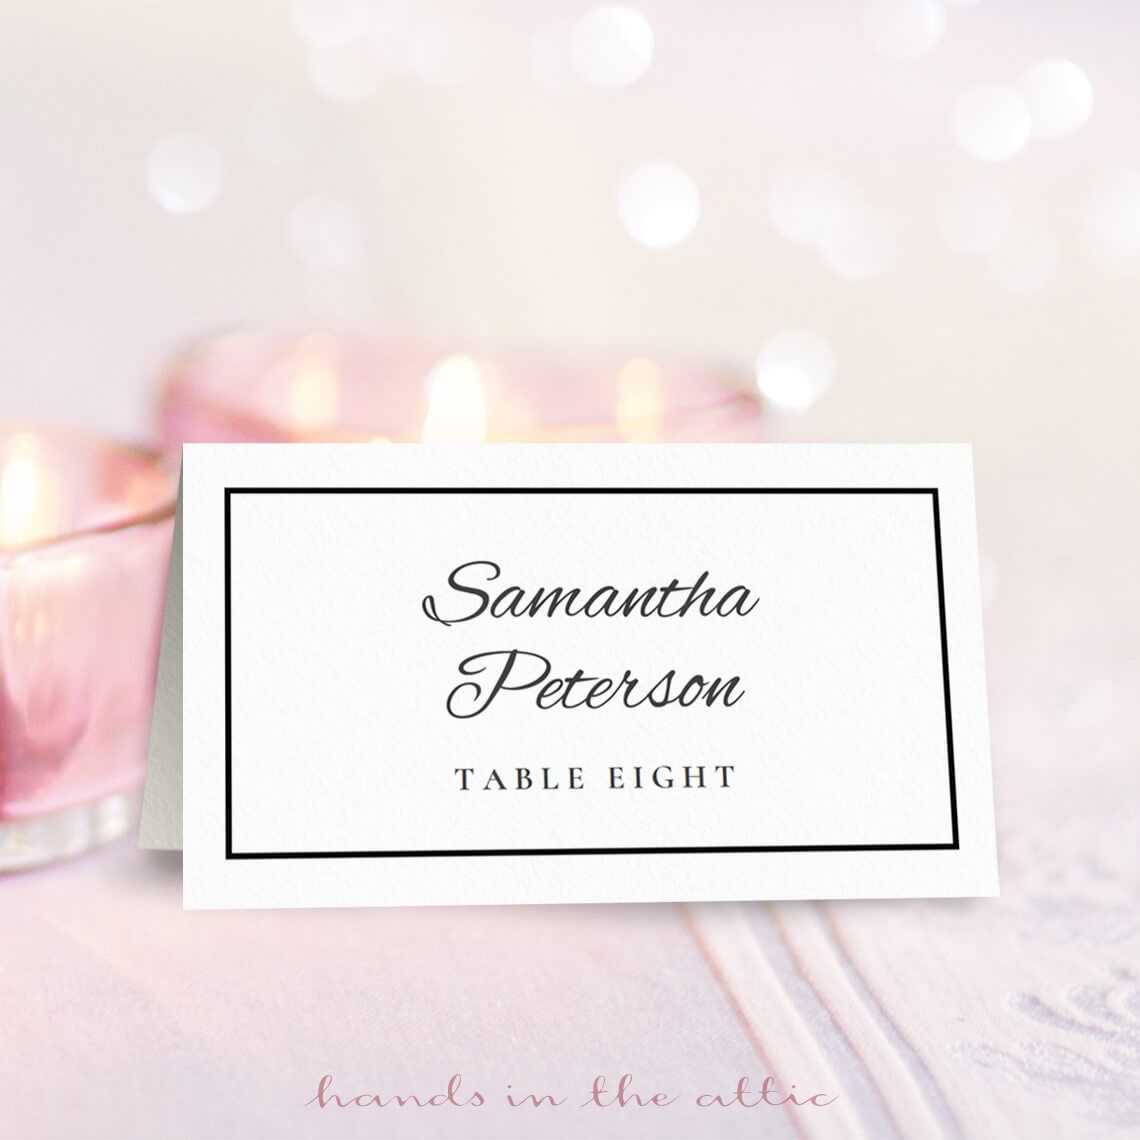 Wedding Place Card Template | Free Place Card Template Regarding Table Place Card Template Free Download